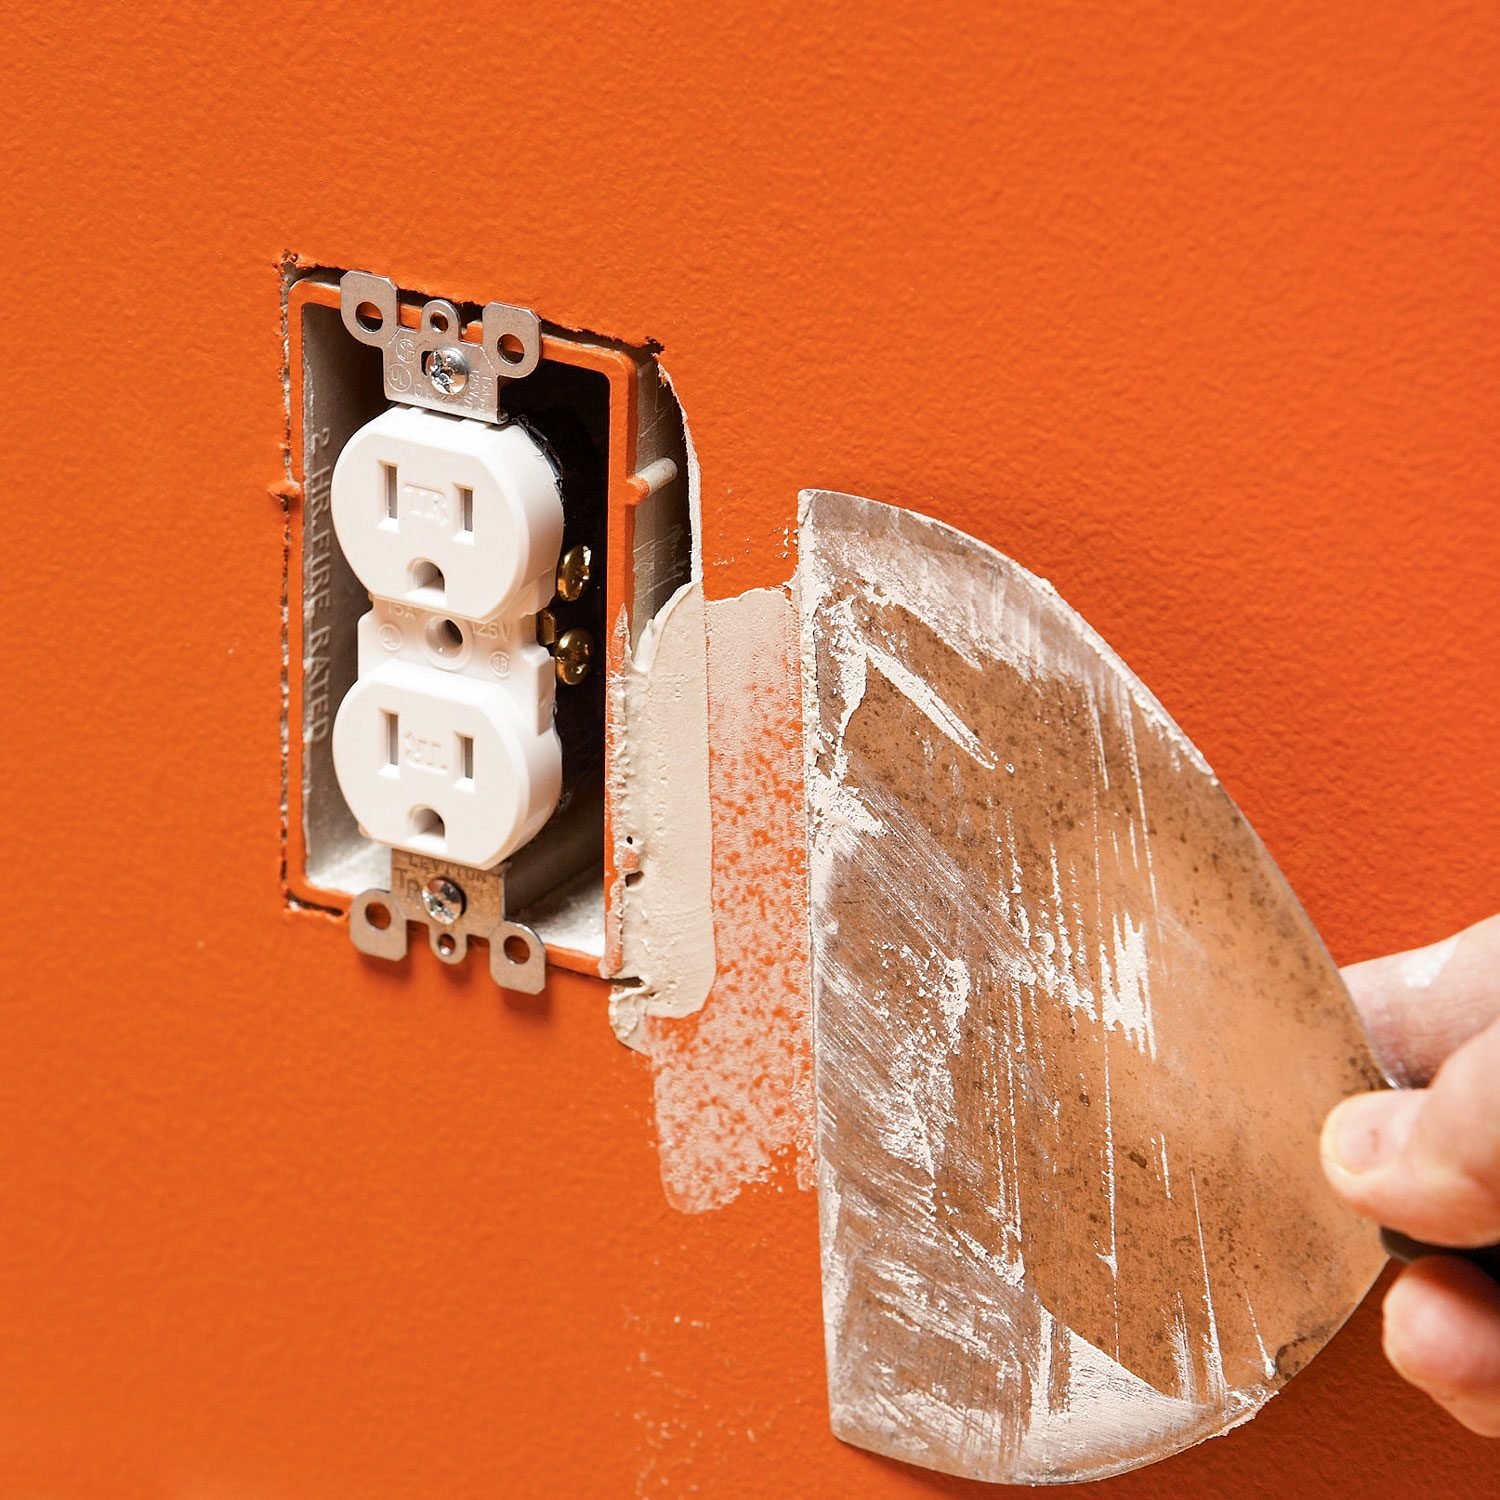 How To Fix an Electrical Box Cutout That's Too Big